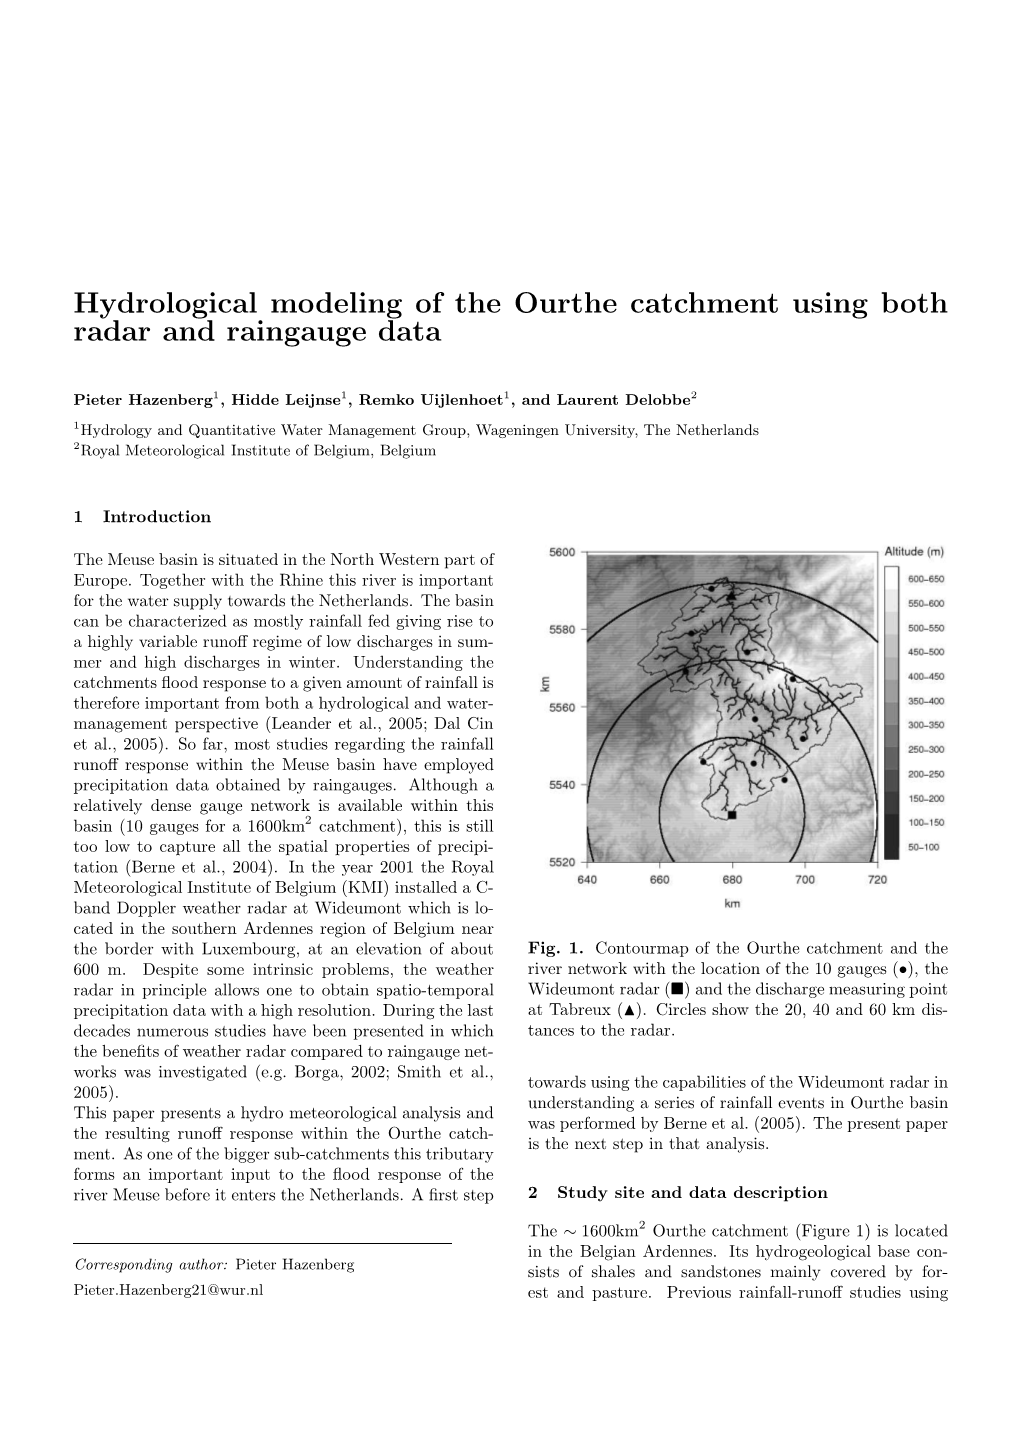 Hydrological Modeling of the Ourthe Catchment Using Both Radar and Raingauge Data